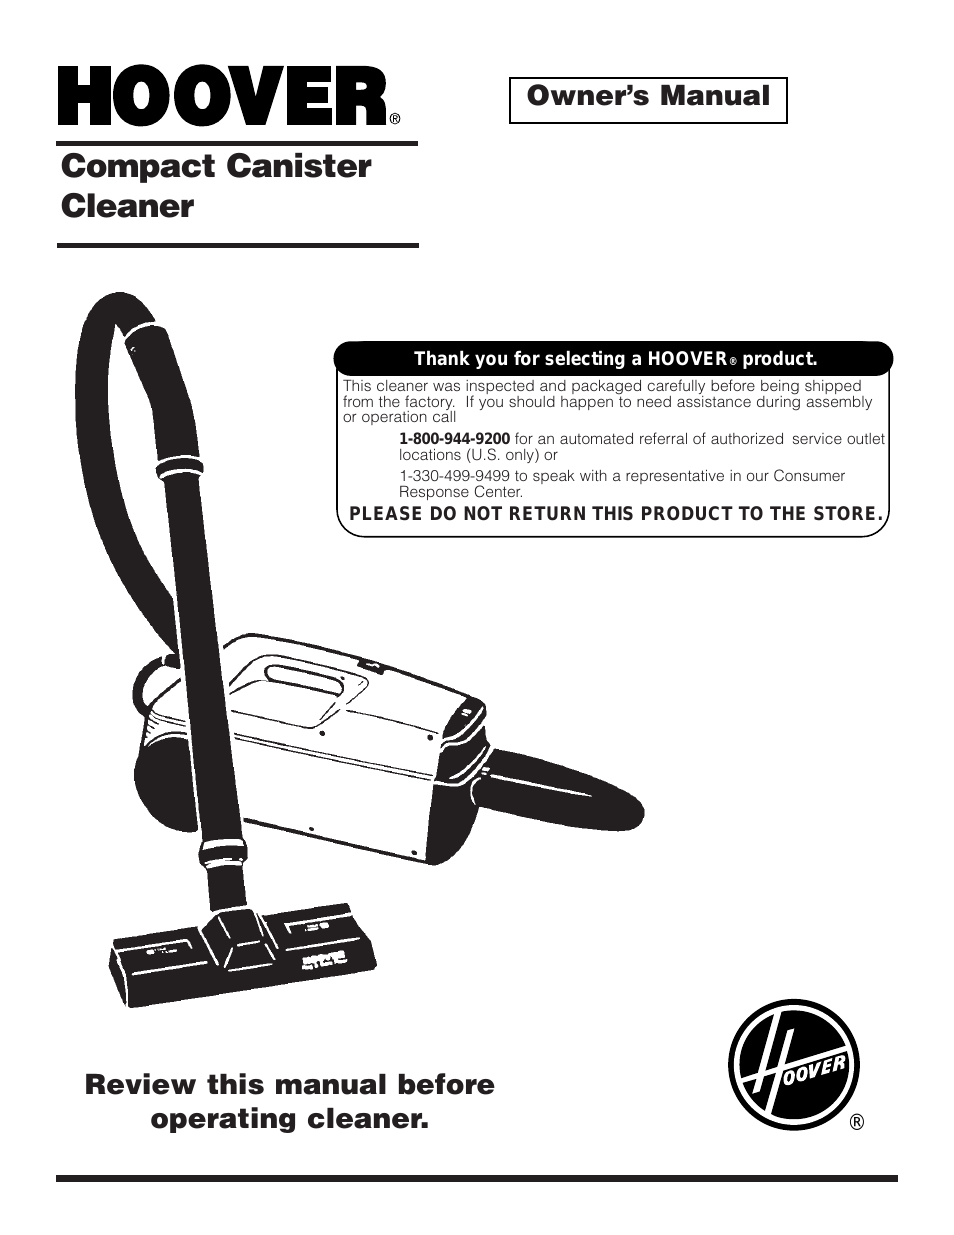 Compact Canister Cleaner